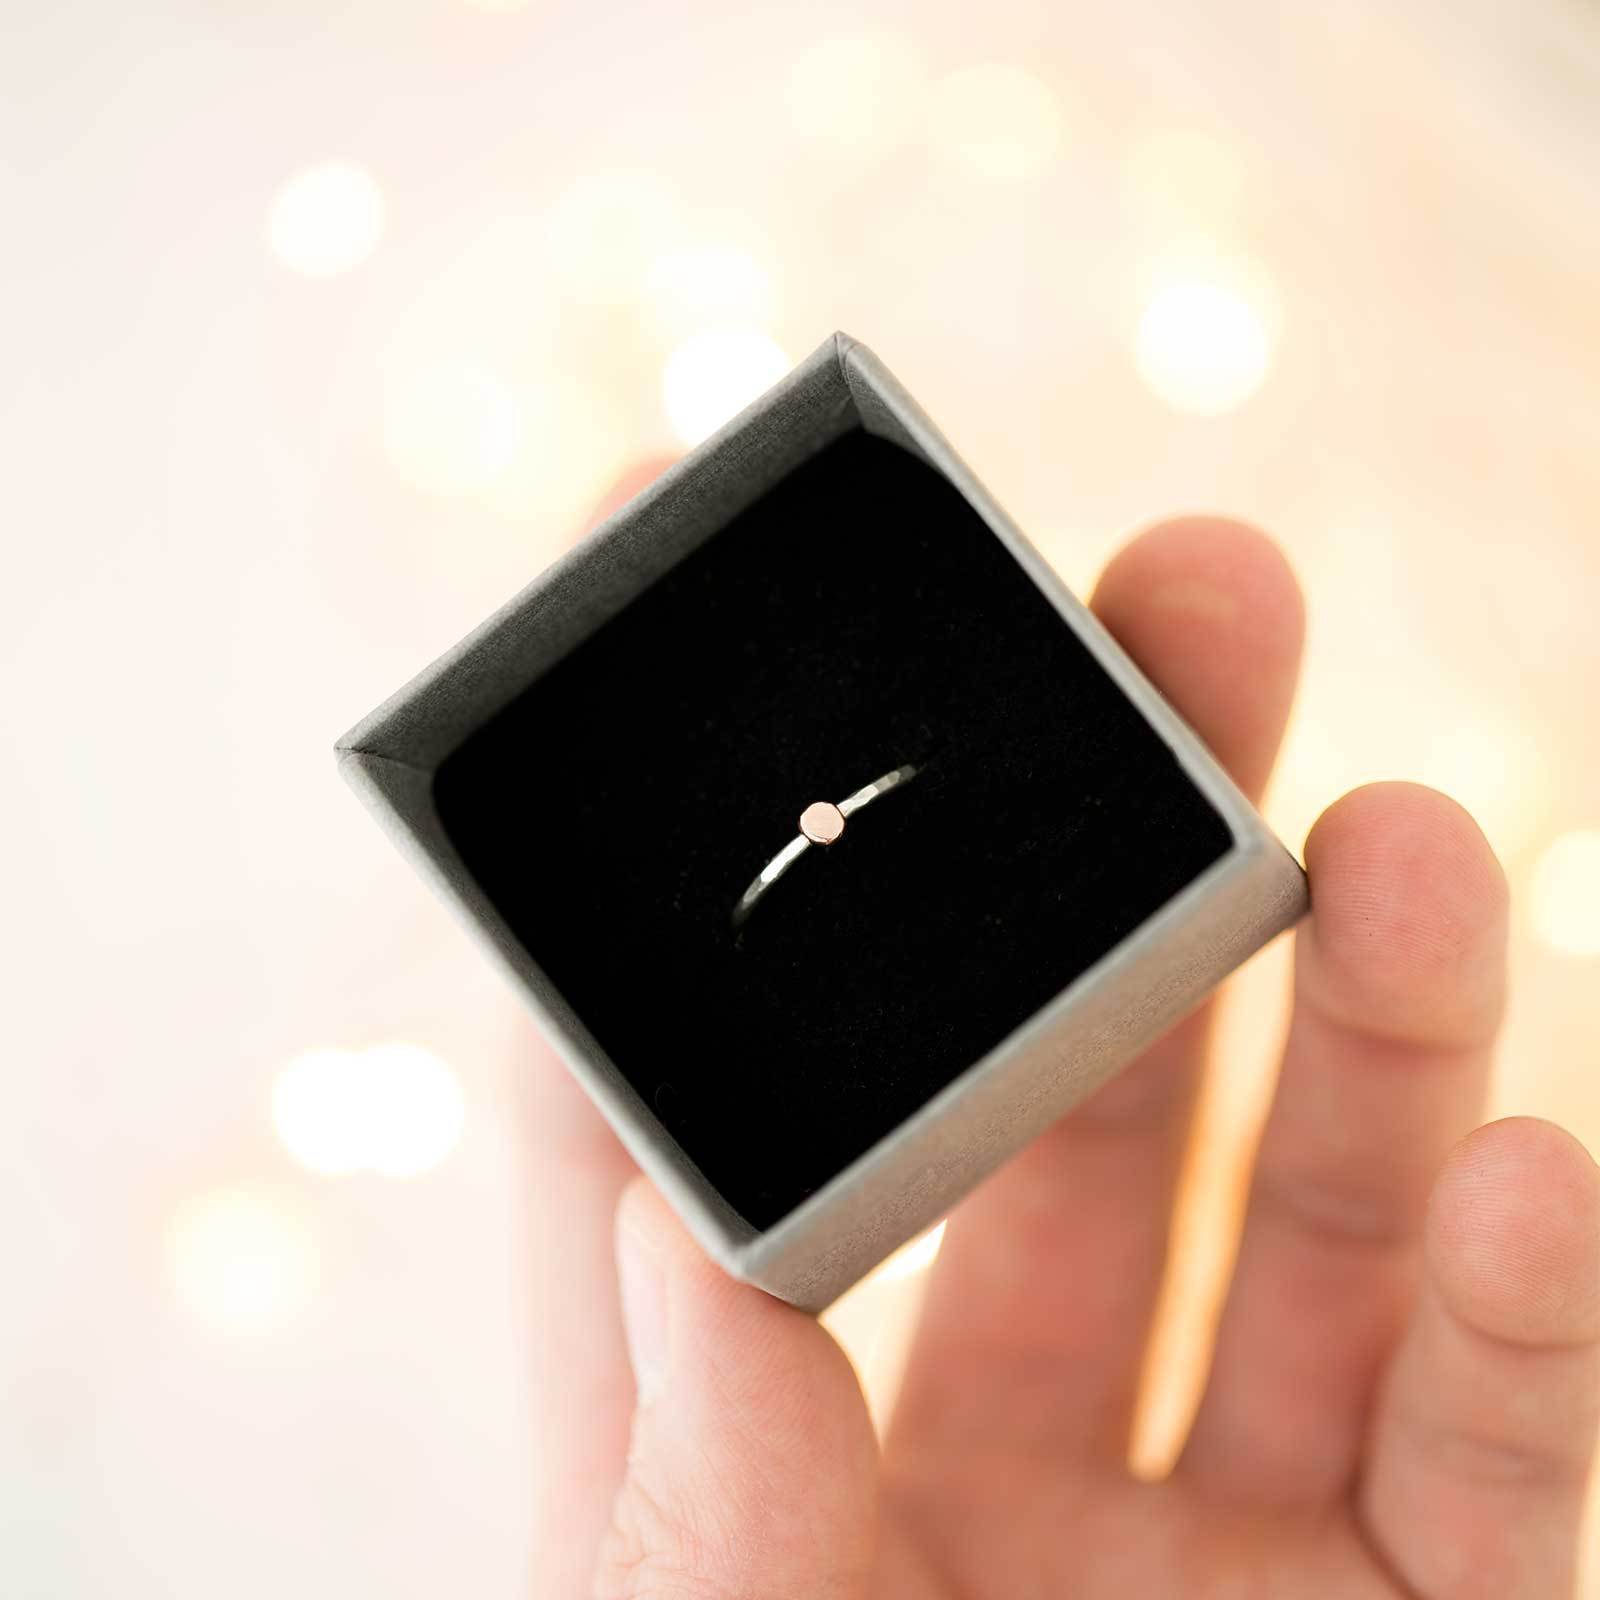 Dainty Dot Ring - Silver/Rose Gold - Handmade Jewelry by Burnish